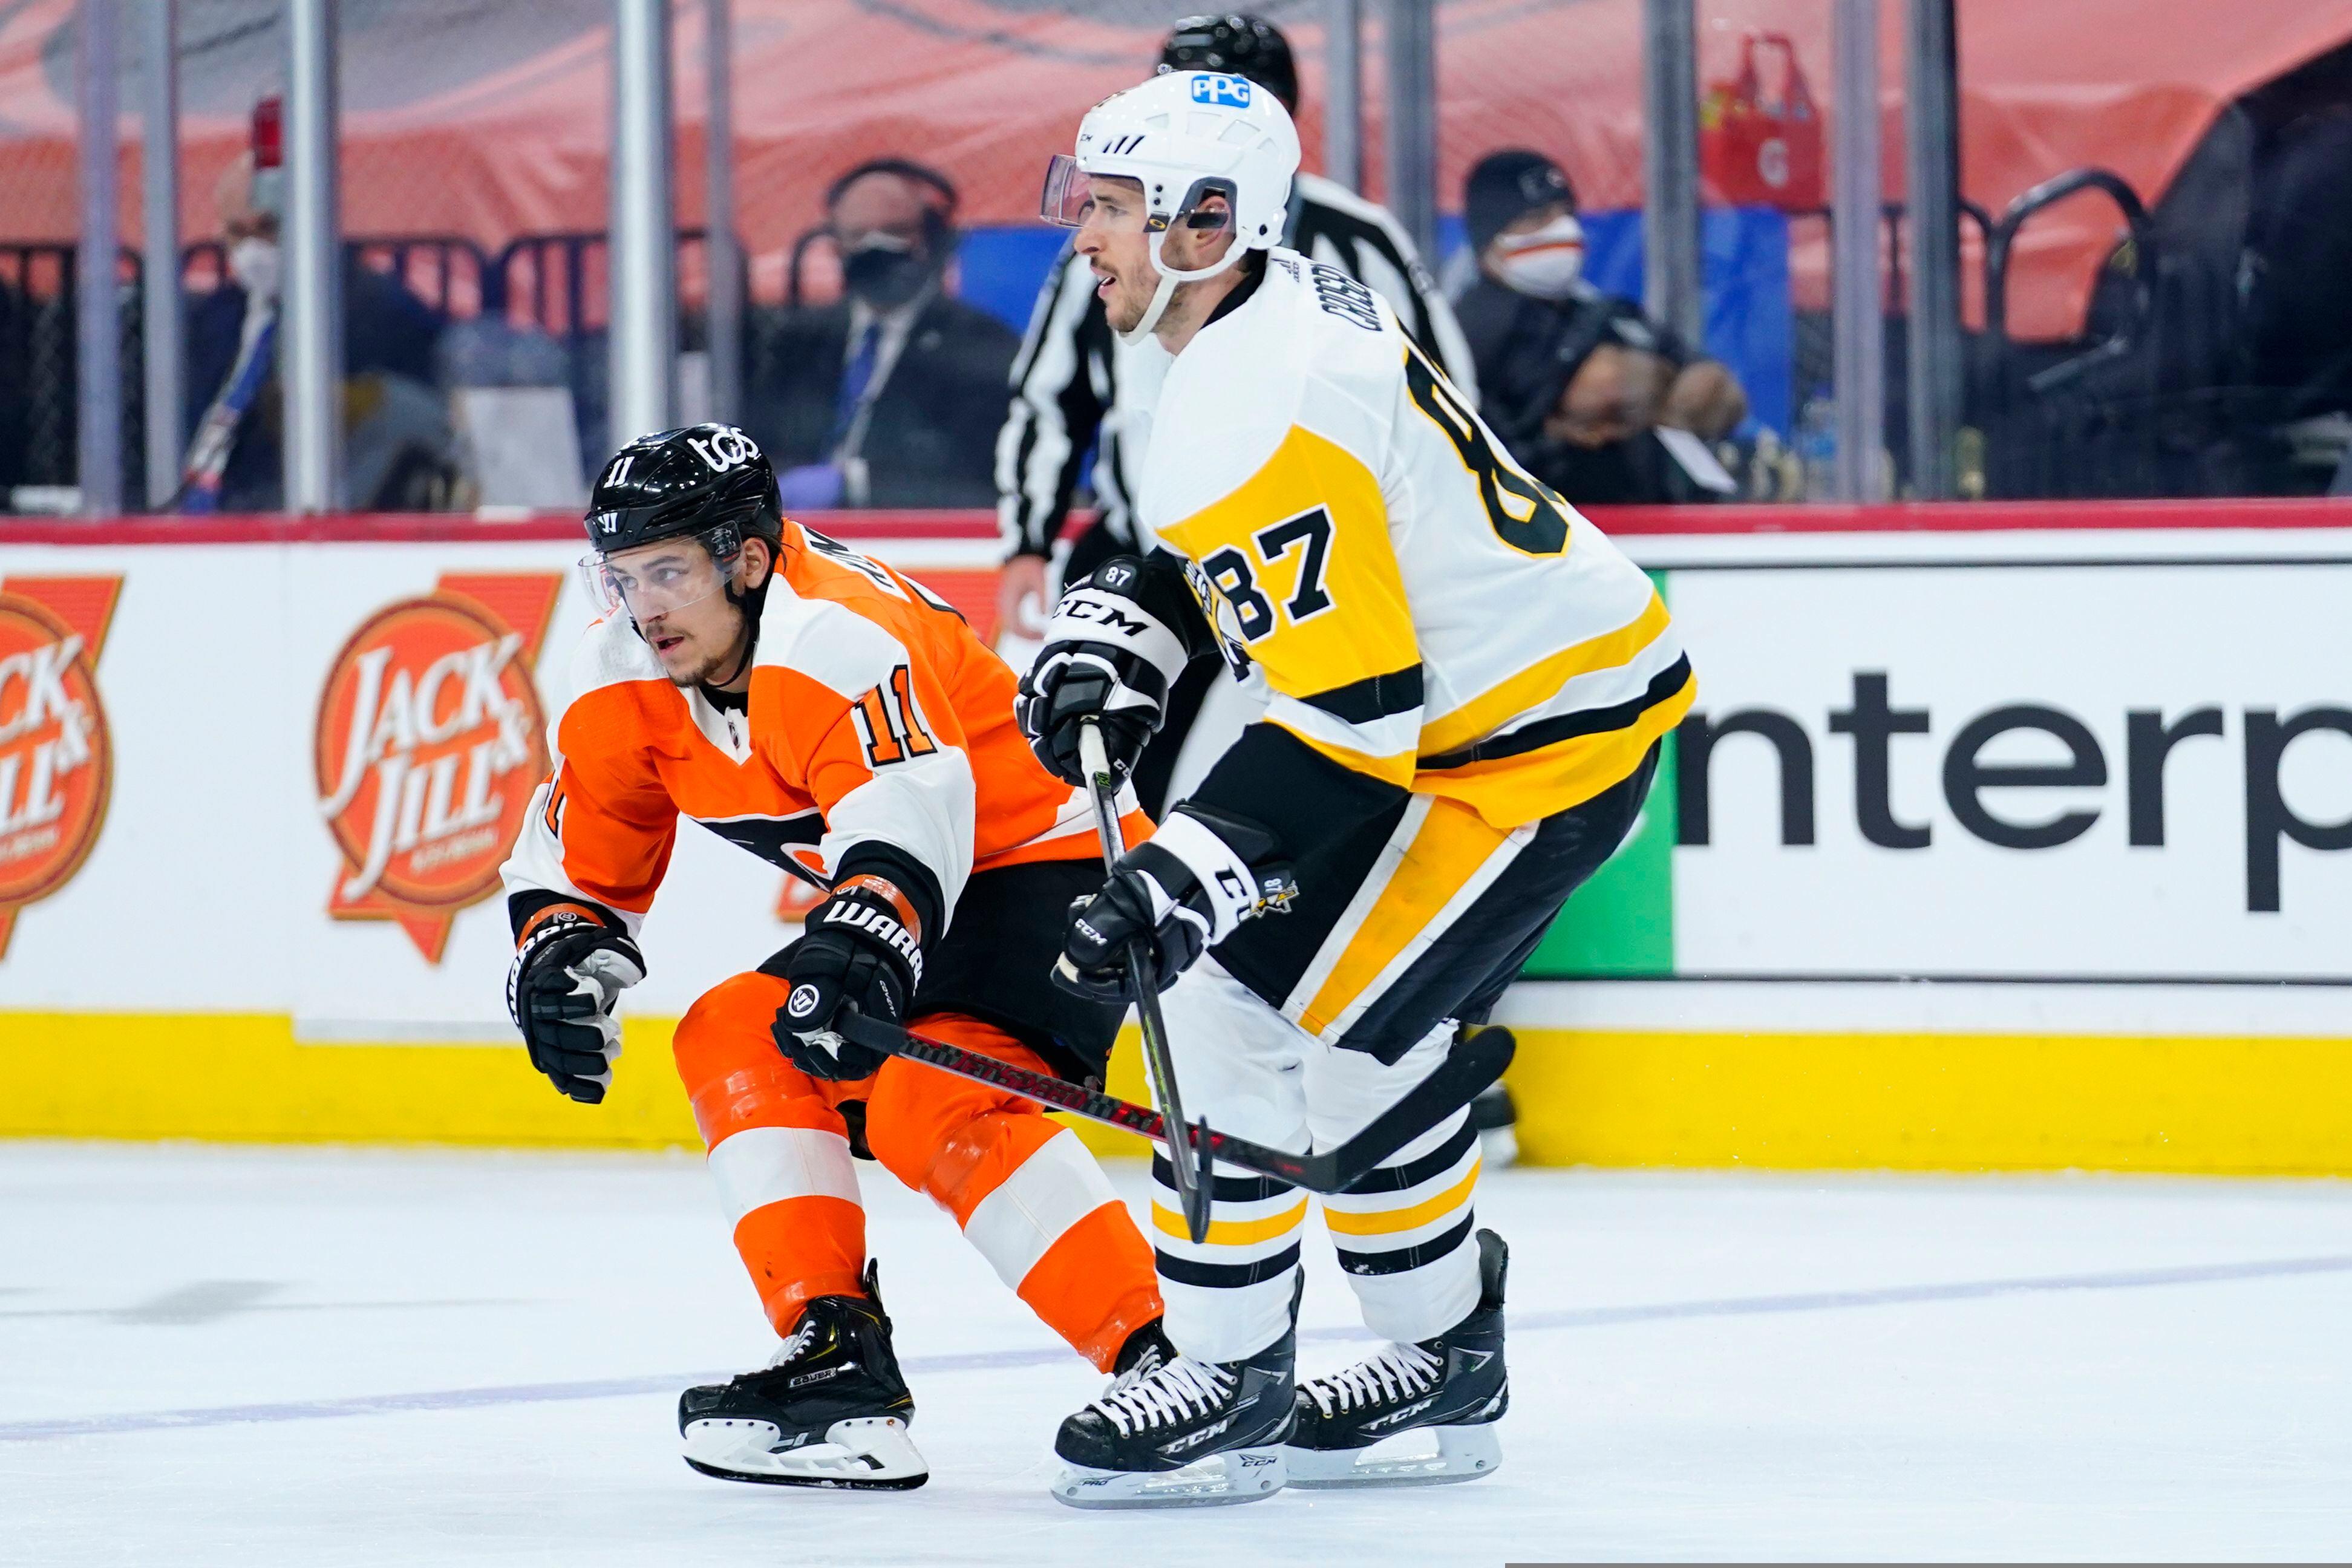 Practice report: Penguins' Kris Letang out of COVID-19 protocol, skating